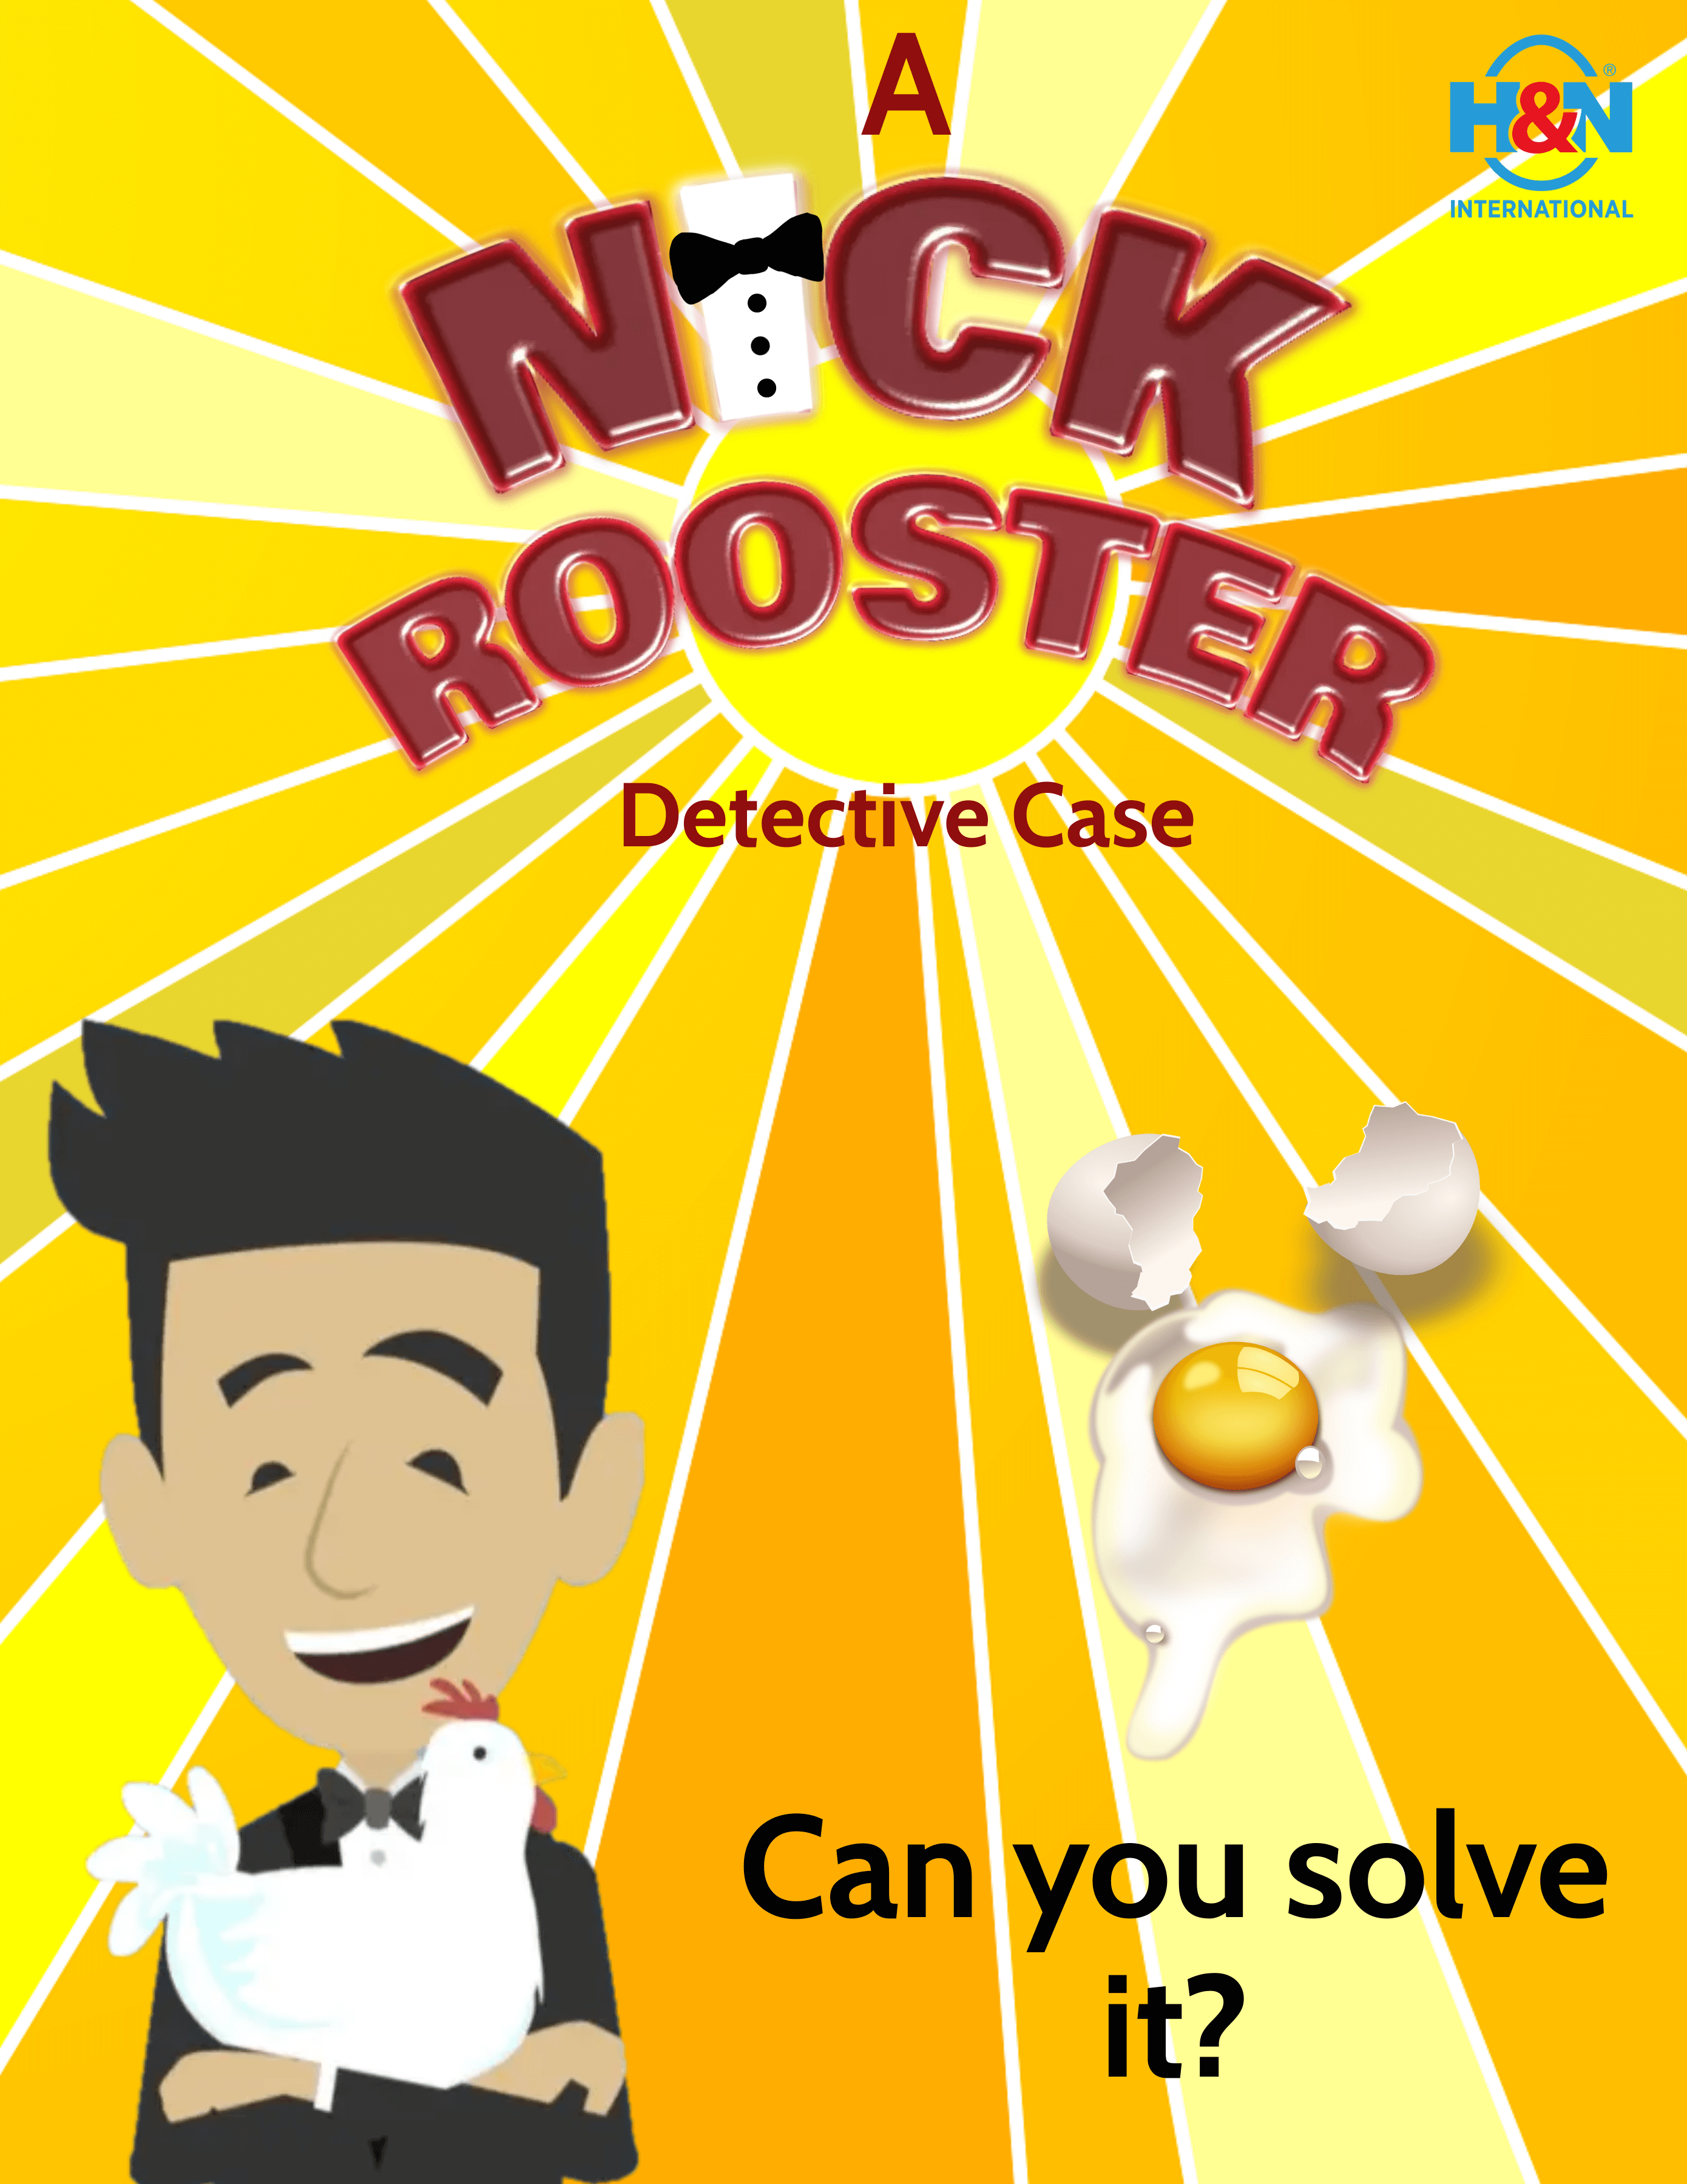 Nick Rooster case no. 12